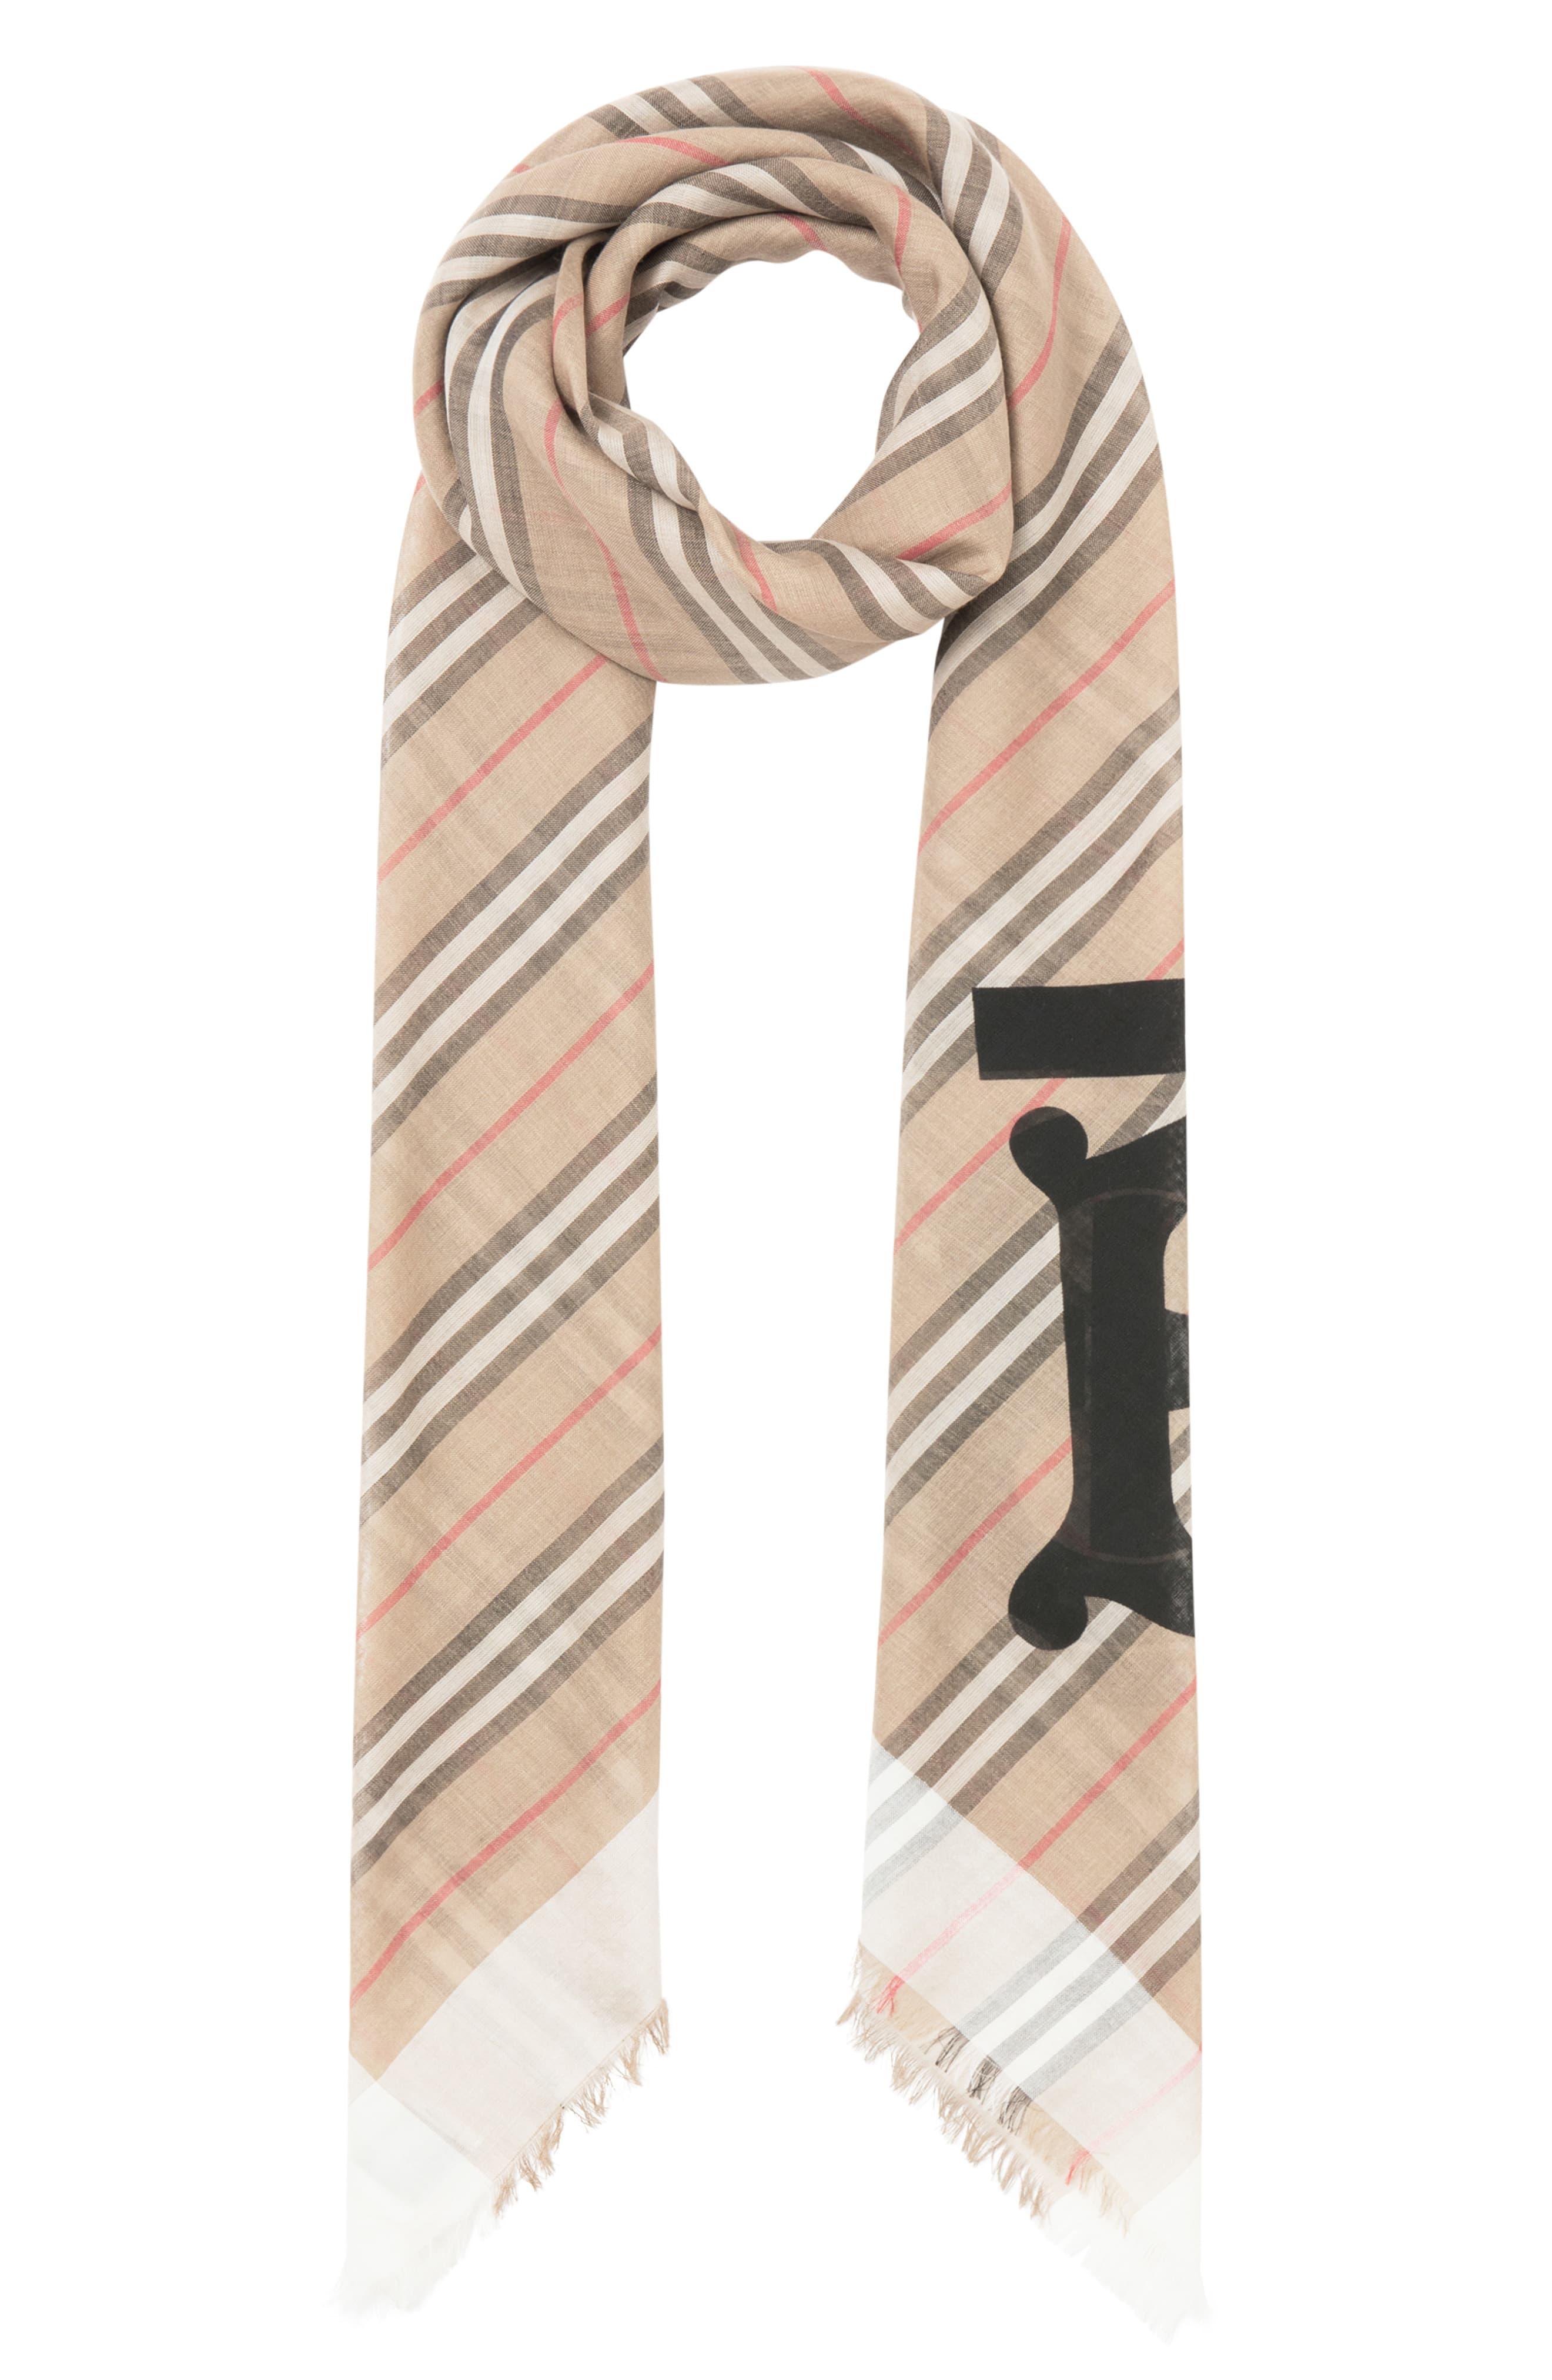 Burberry Tb Monogram Heritage Stripe Scarf in Natural - Lyst